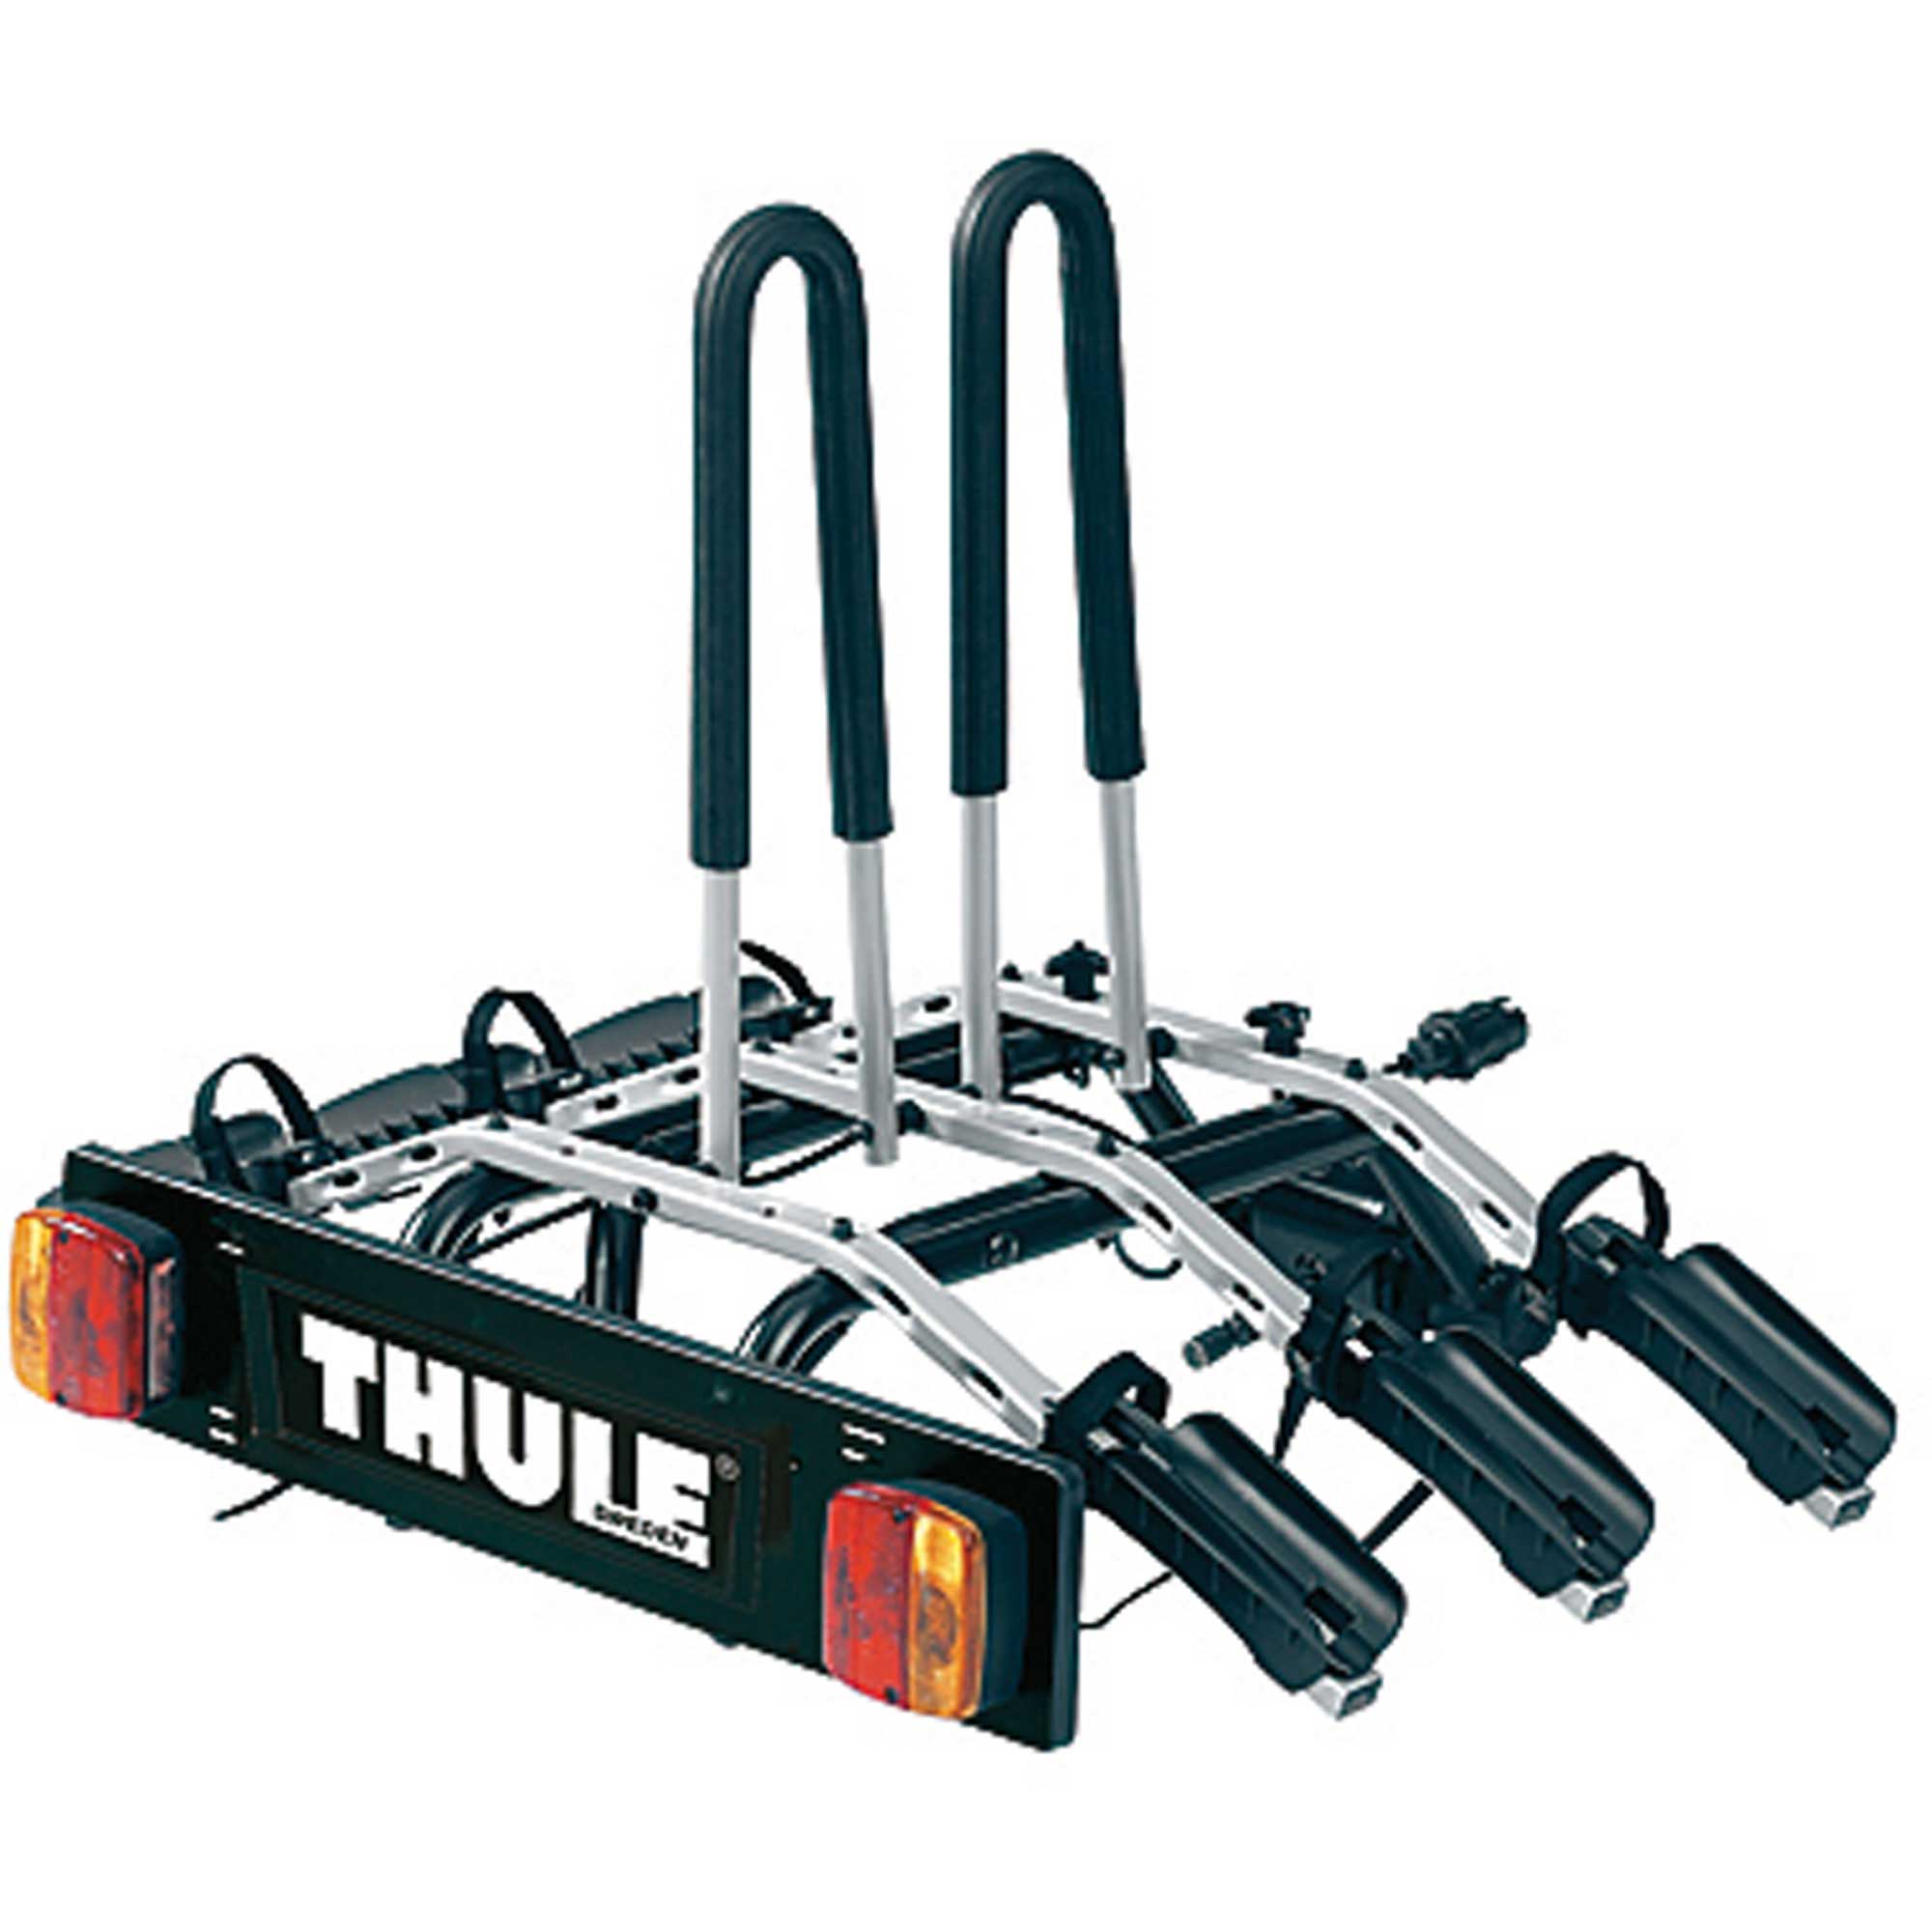 Thule 9403 Spare Wheel Holder x 4 for RideOn Towbar Cycle Carrier 34139 